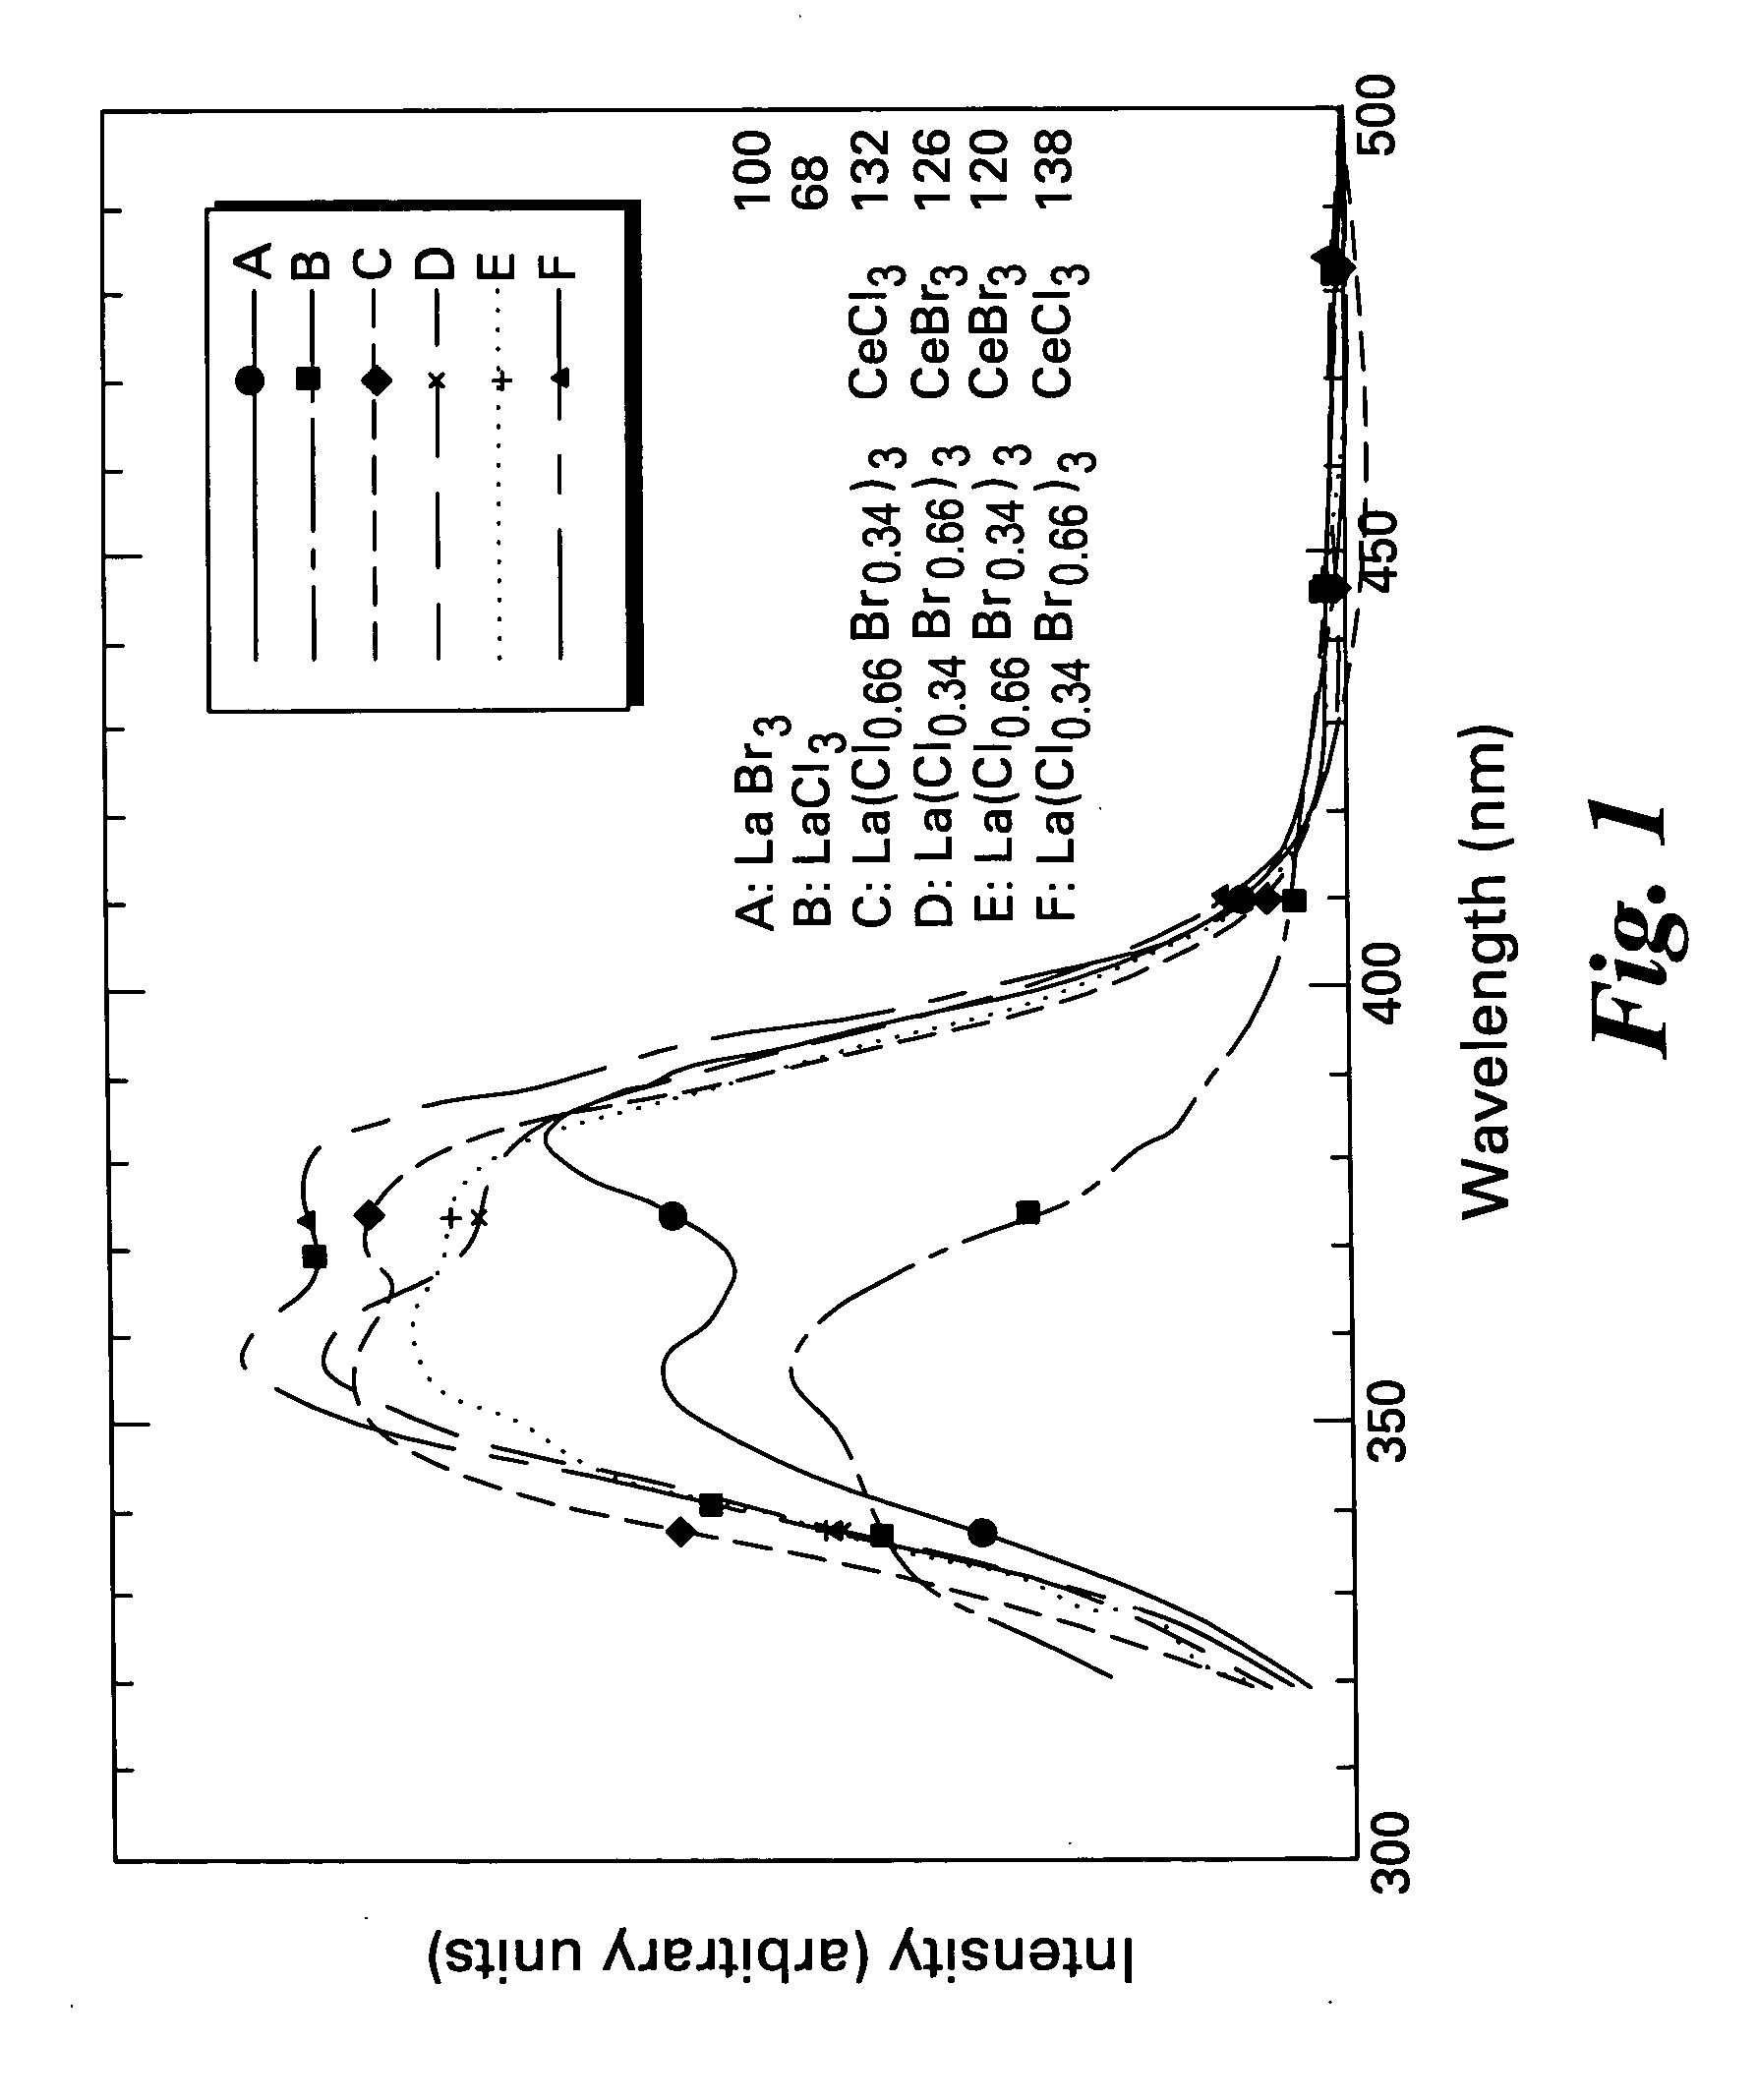 Scintillator compositions, and related processes and articles of manufacture